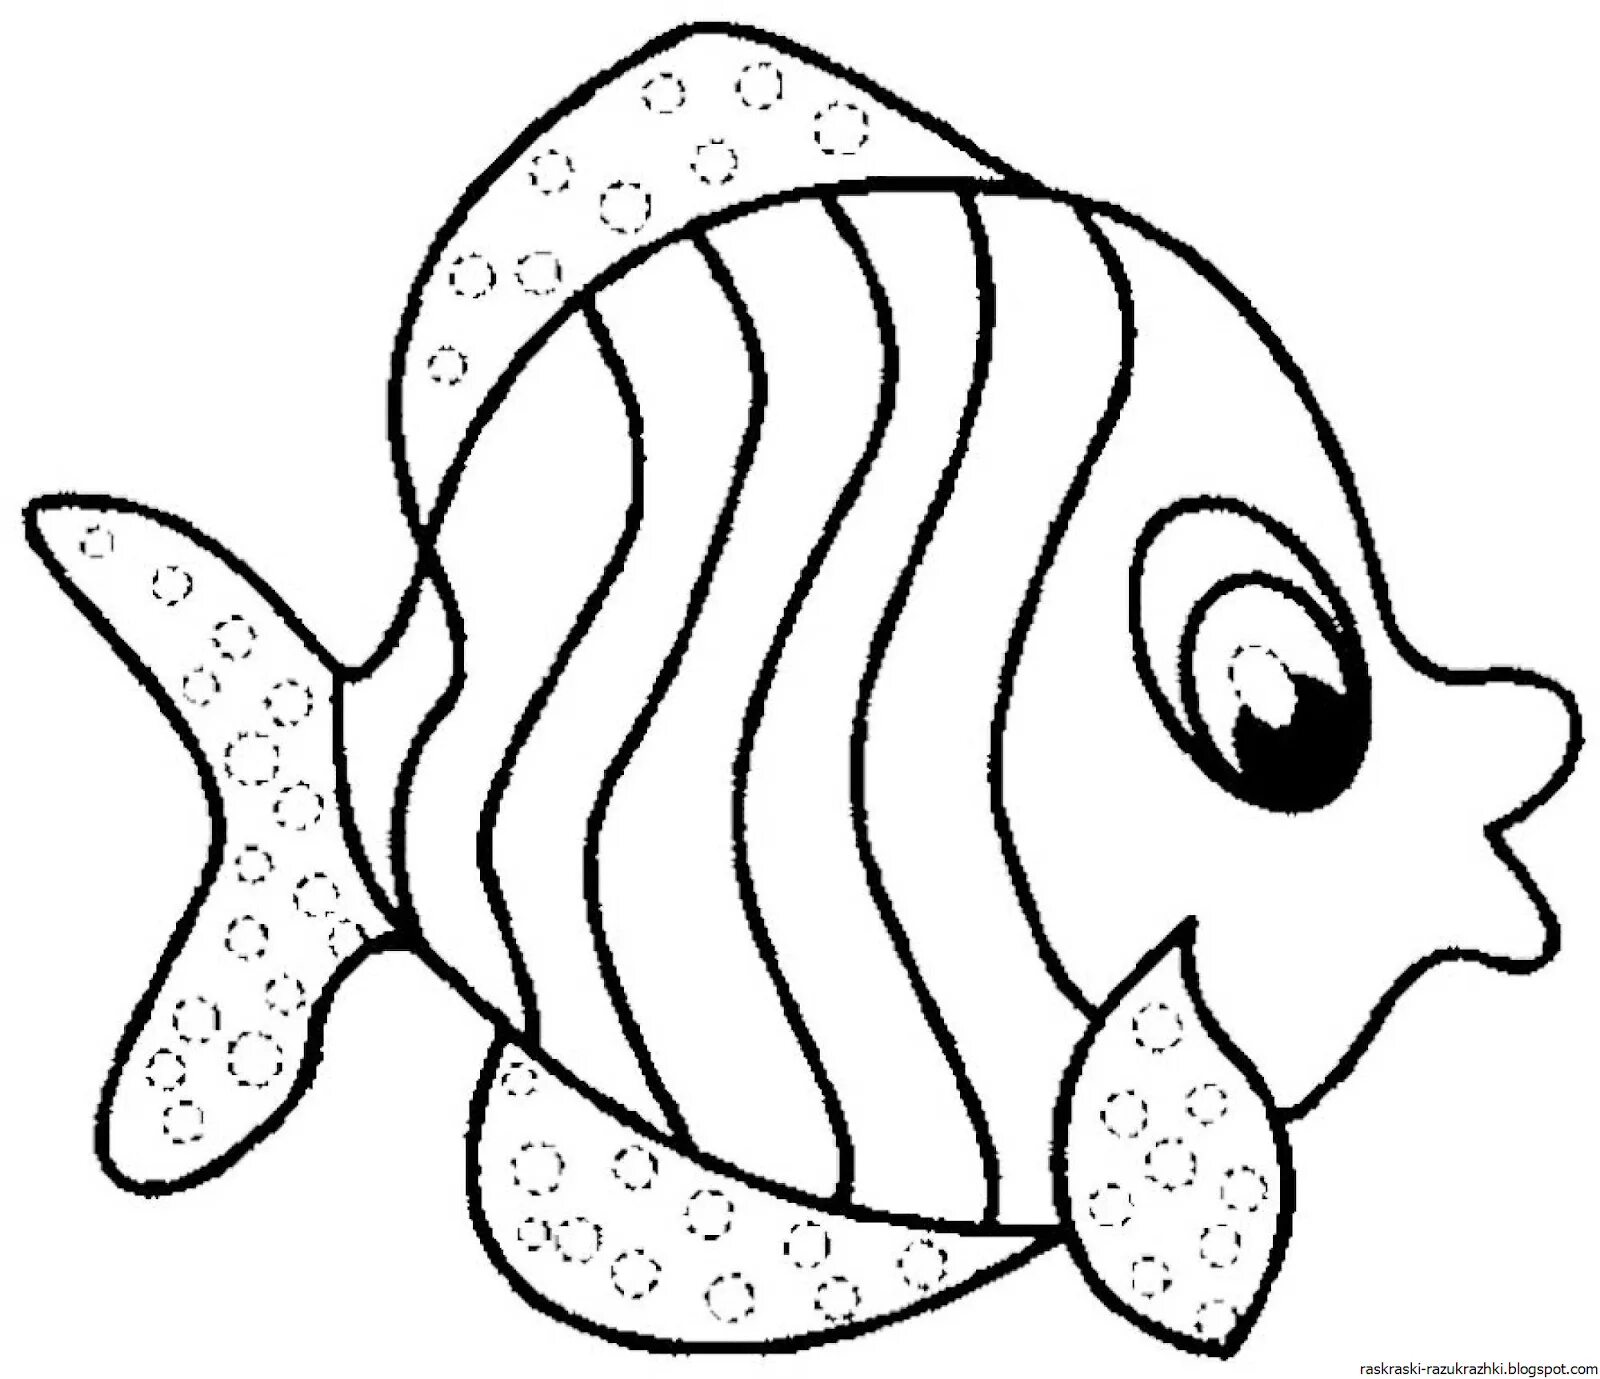 Calming fish coloring page